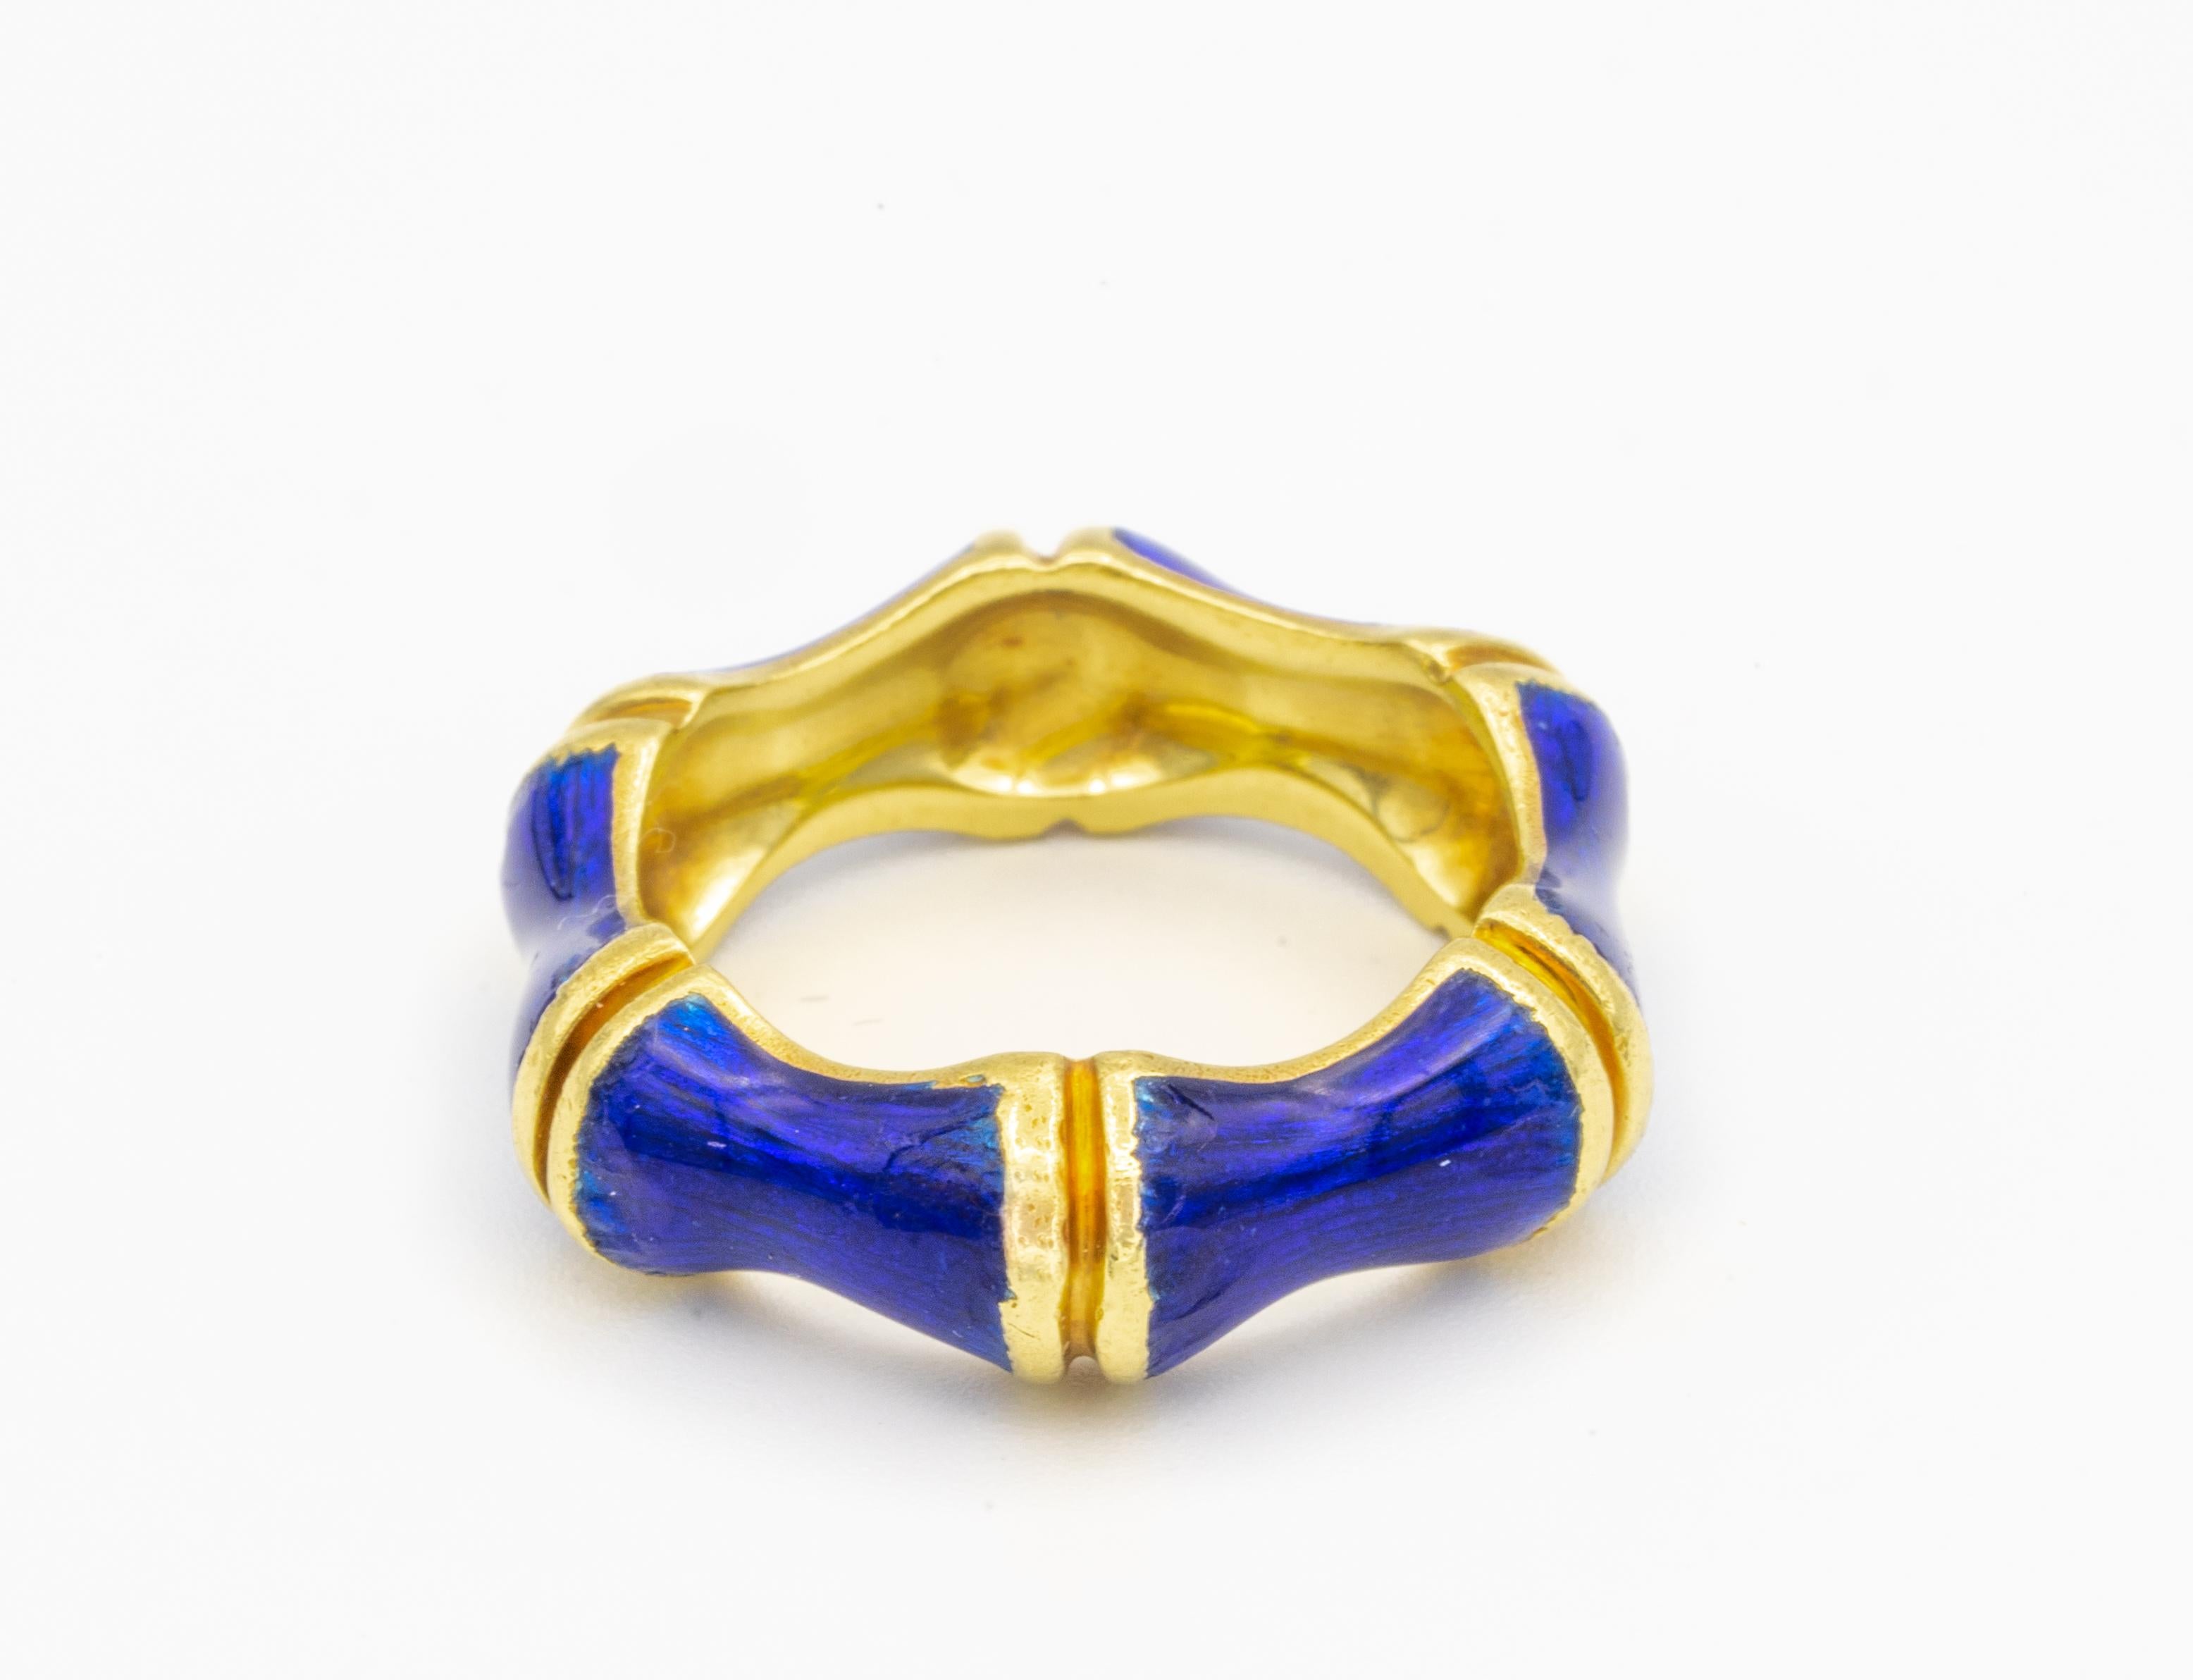 Tiffany & Co. 18k Gold and Enamel Bamboo ring , Circa 1960's -  
Brand: Tiffany & Co. 
Ring Size 6.5 
Width: 7.0 mm 
Signed: TIFFANY  
Stamped: 18K  
Condition: Enamel in excellent condition, consistent with age.   

“ Free overnight delivery is